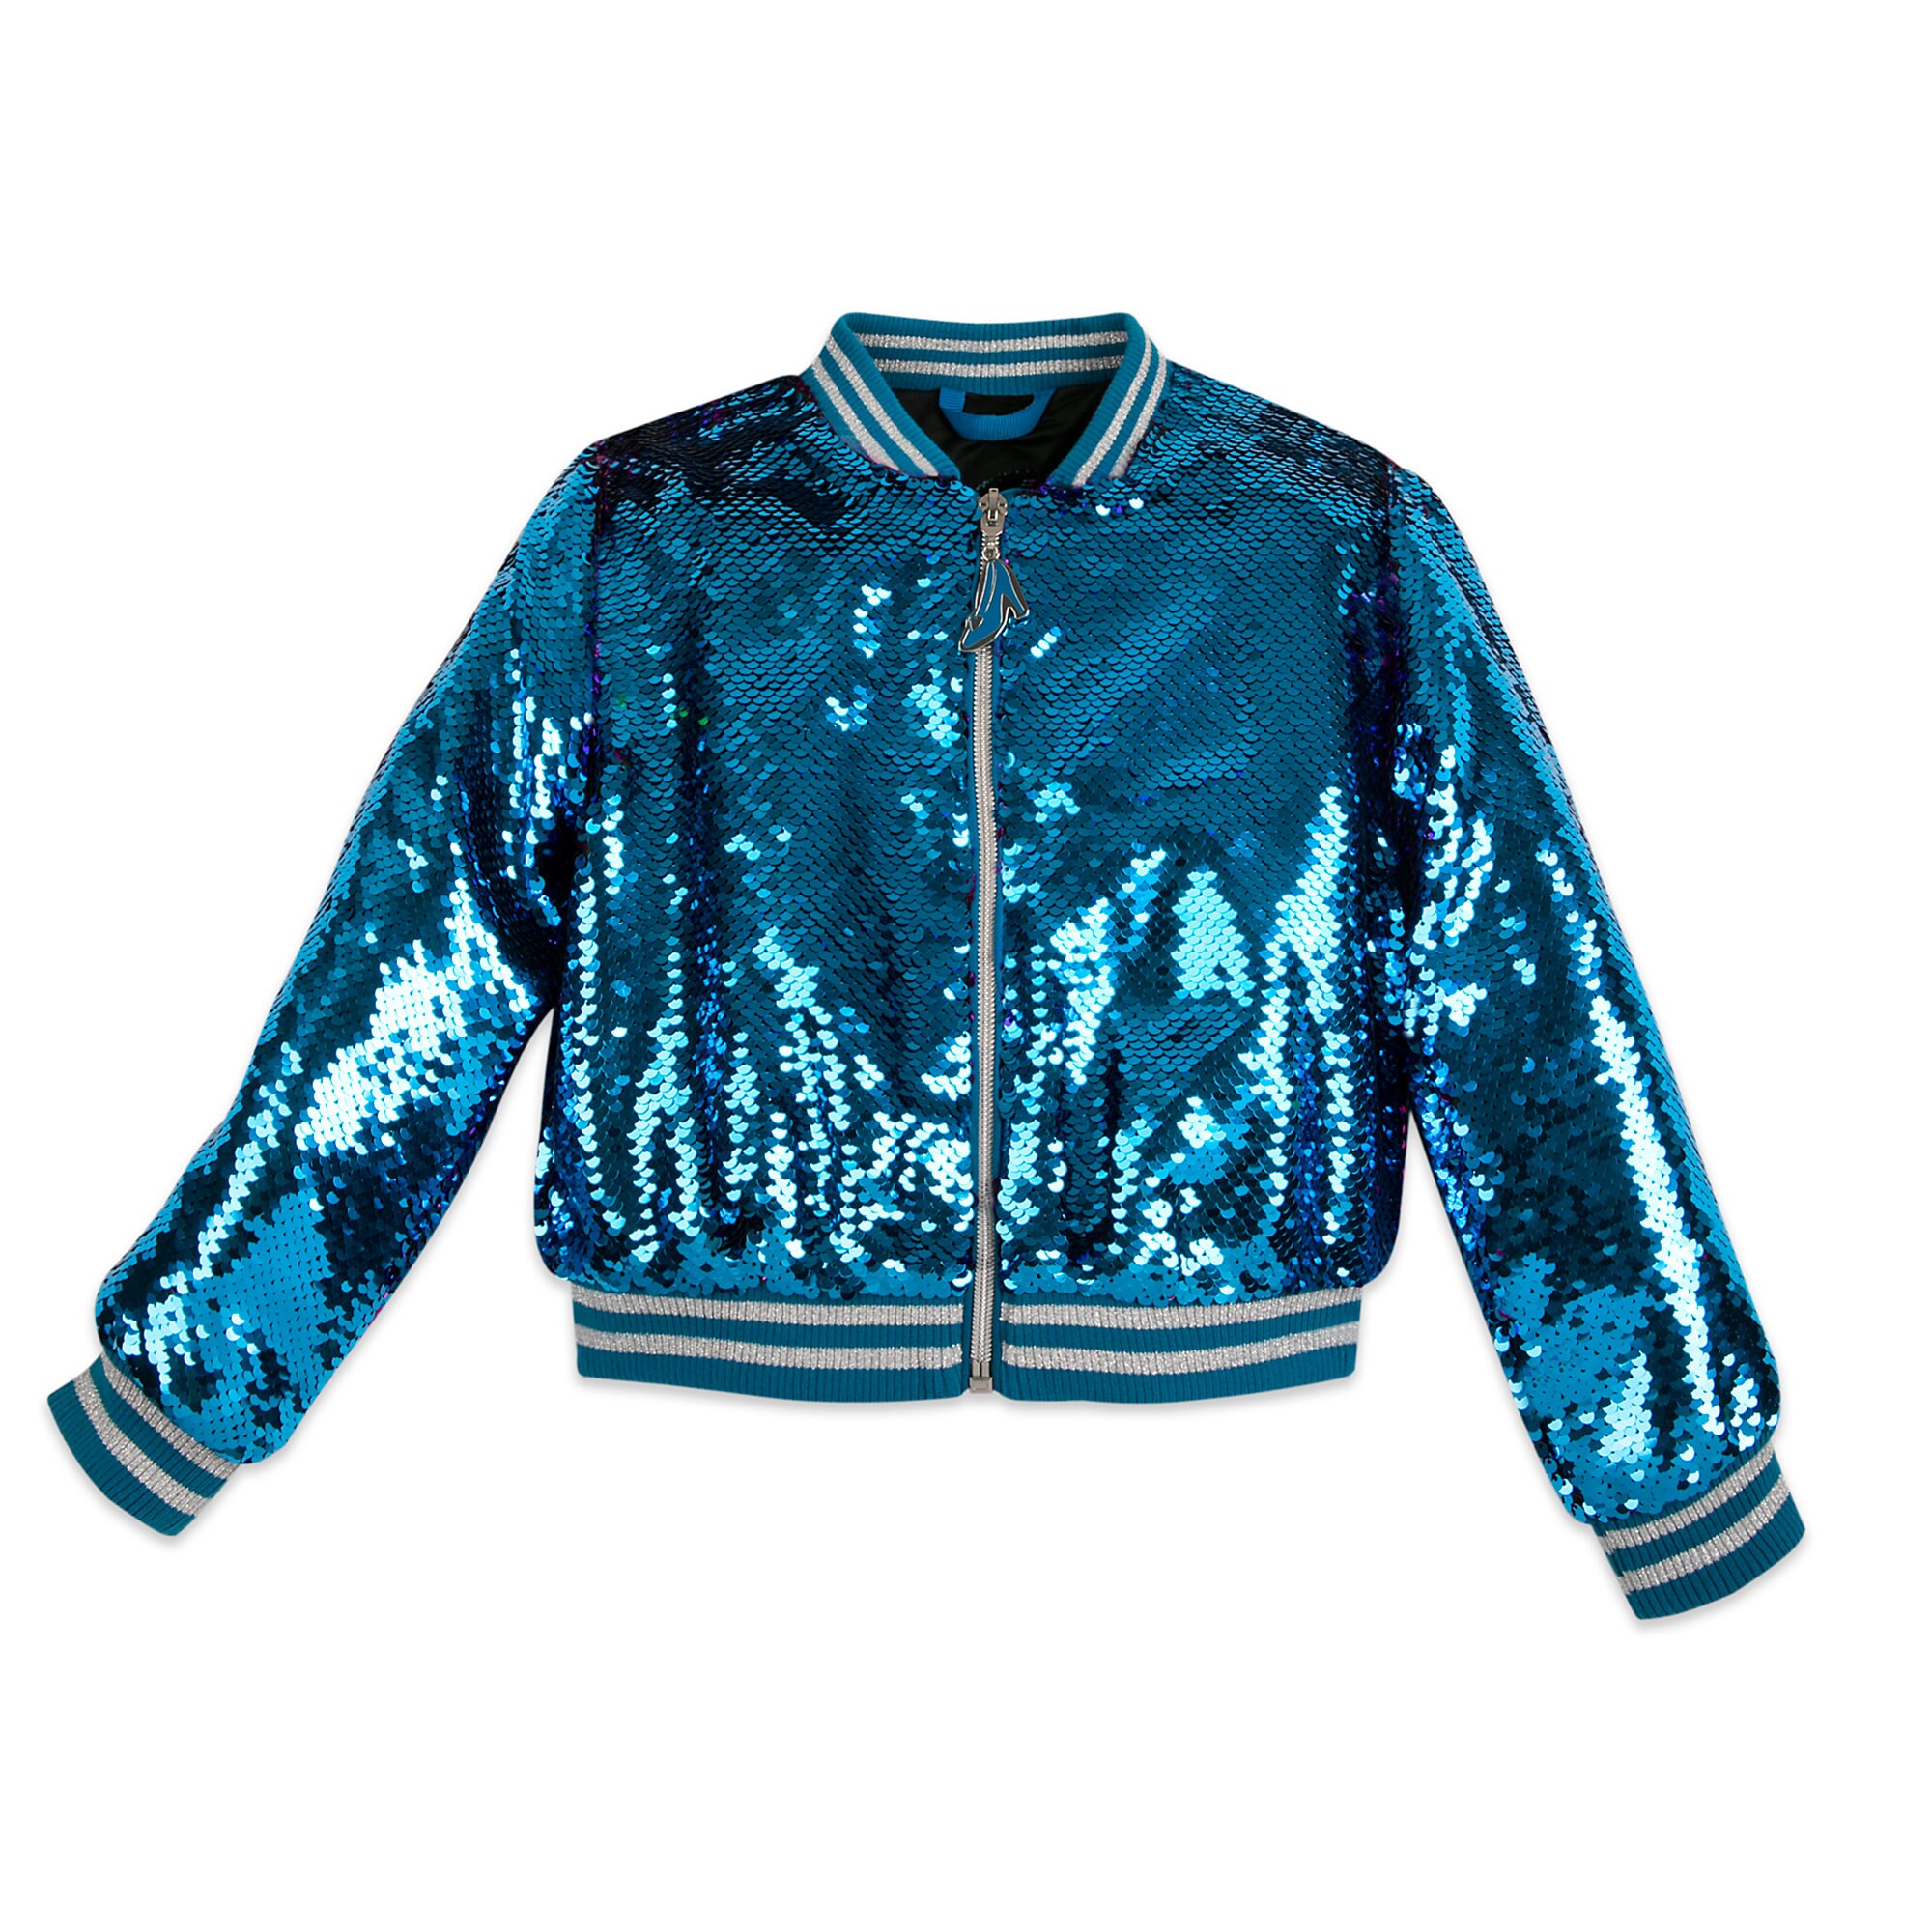 Cinderella Reversible Sequin Bomber Jacket for Girls has hit the ...